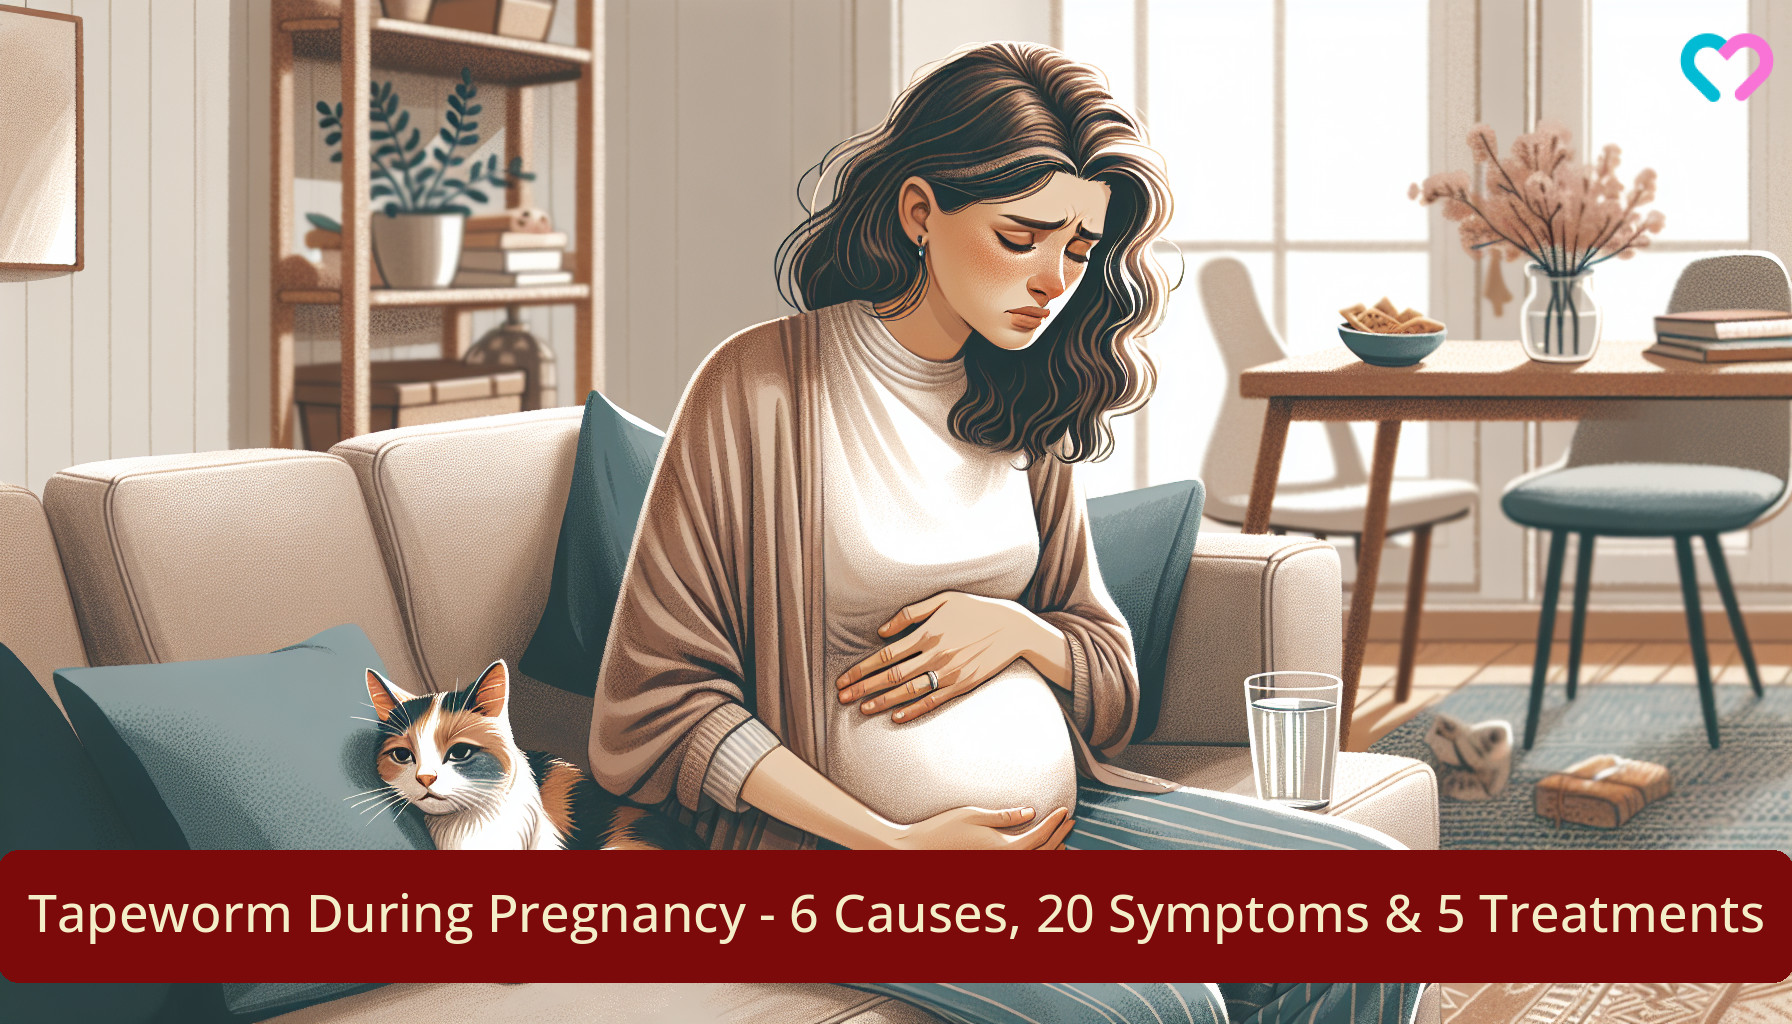 Tapeworm Infection During Pregnancy_illustration